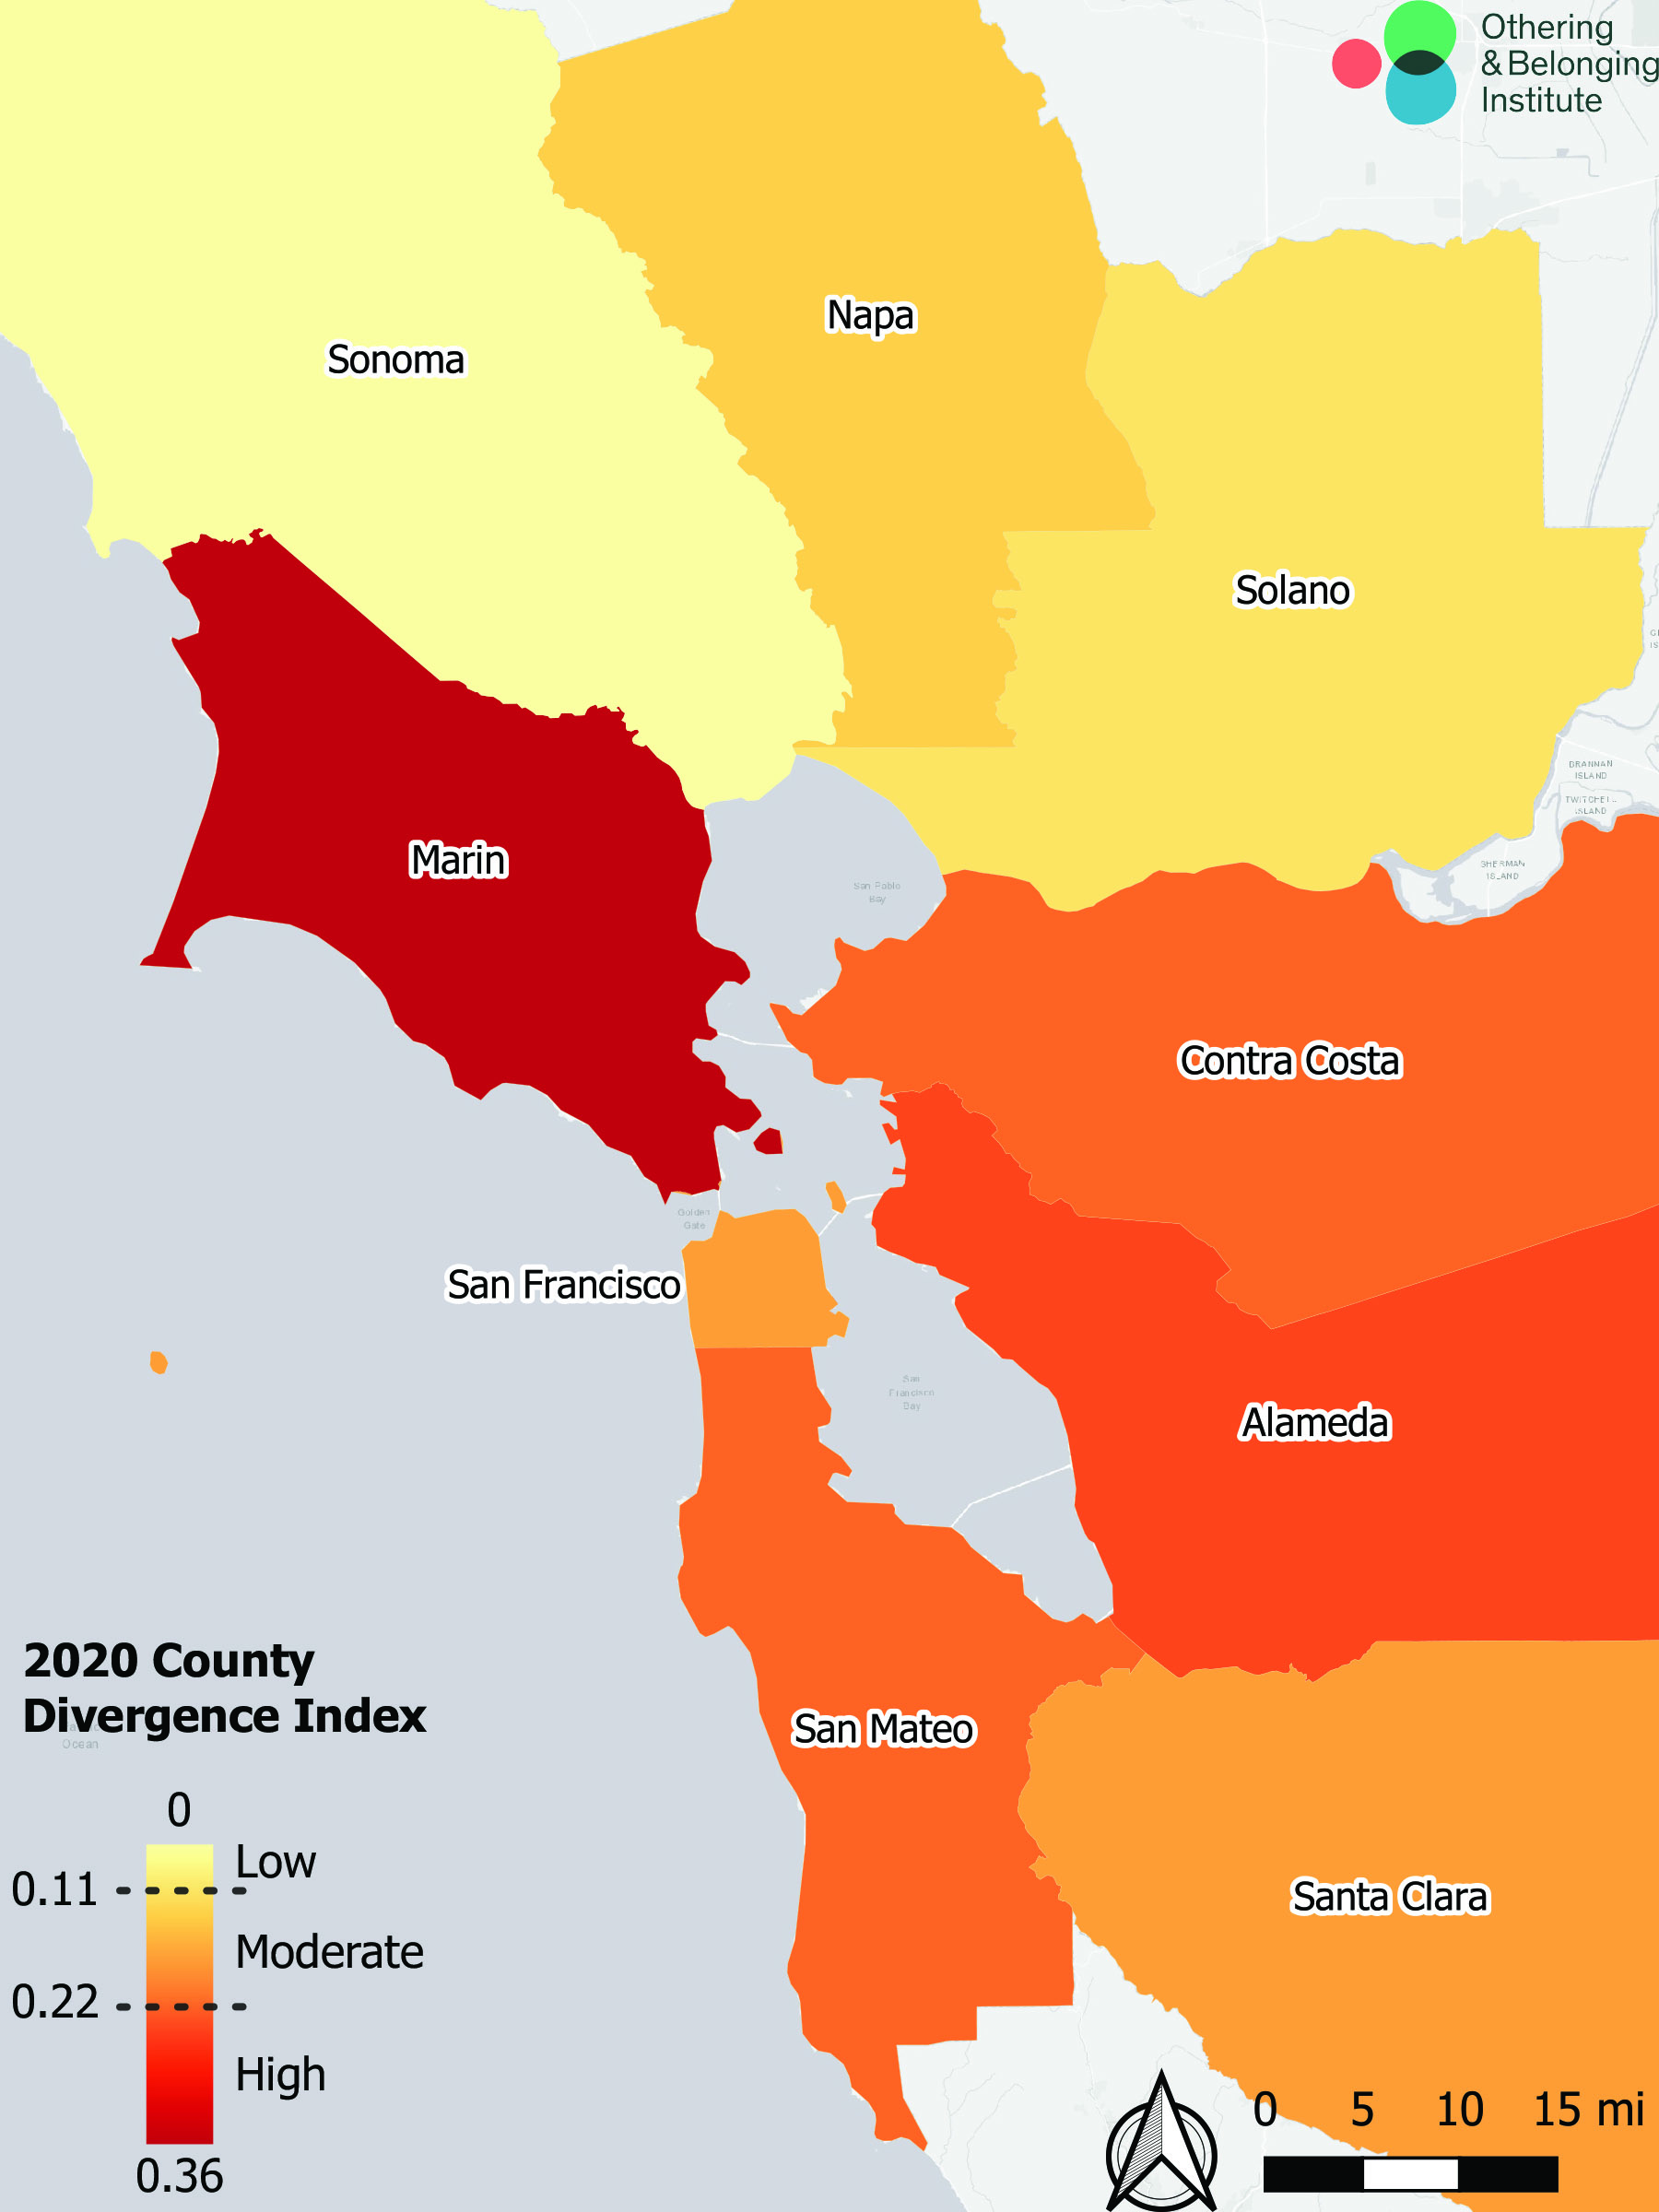 Divergence index levels for the Bay Area in 2020. Marin County ranks markedly higher in divergence compared to its nine county neighbors.